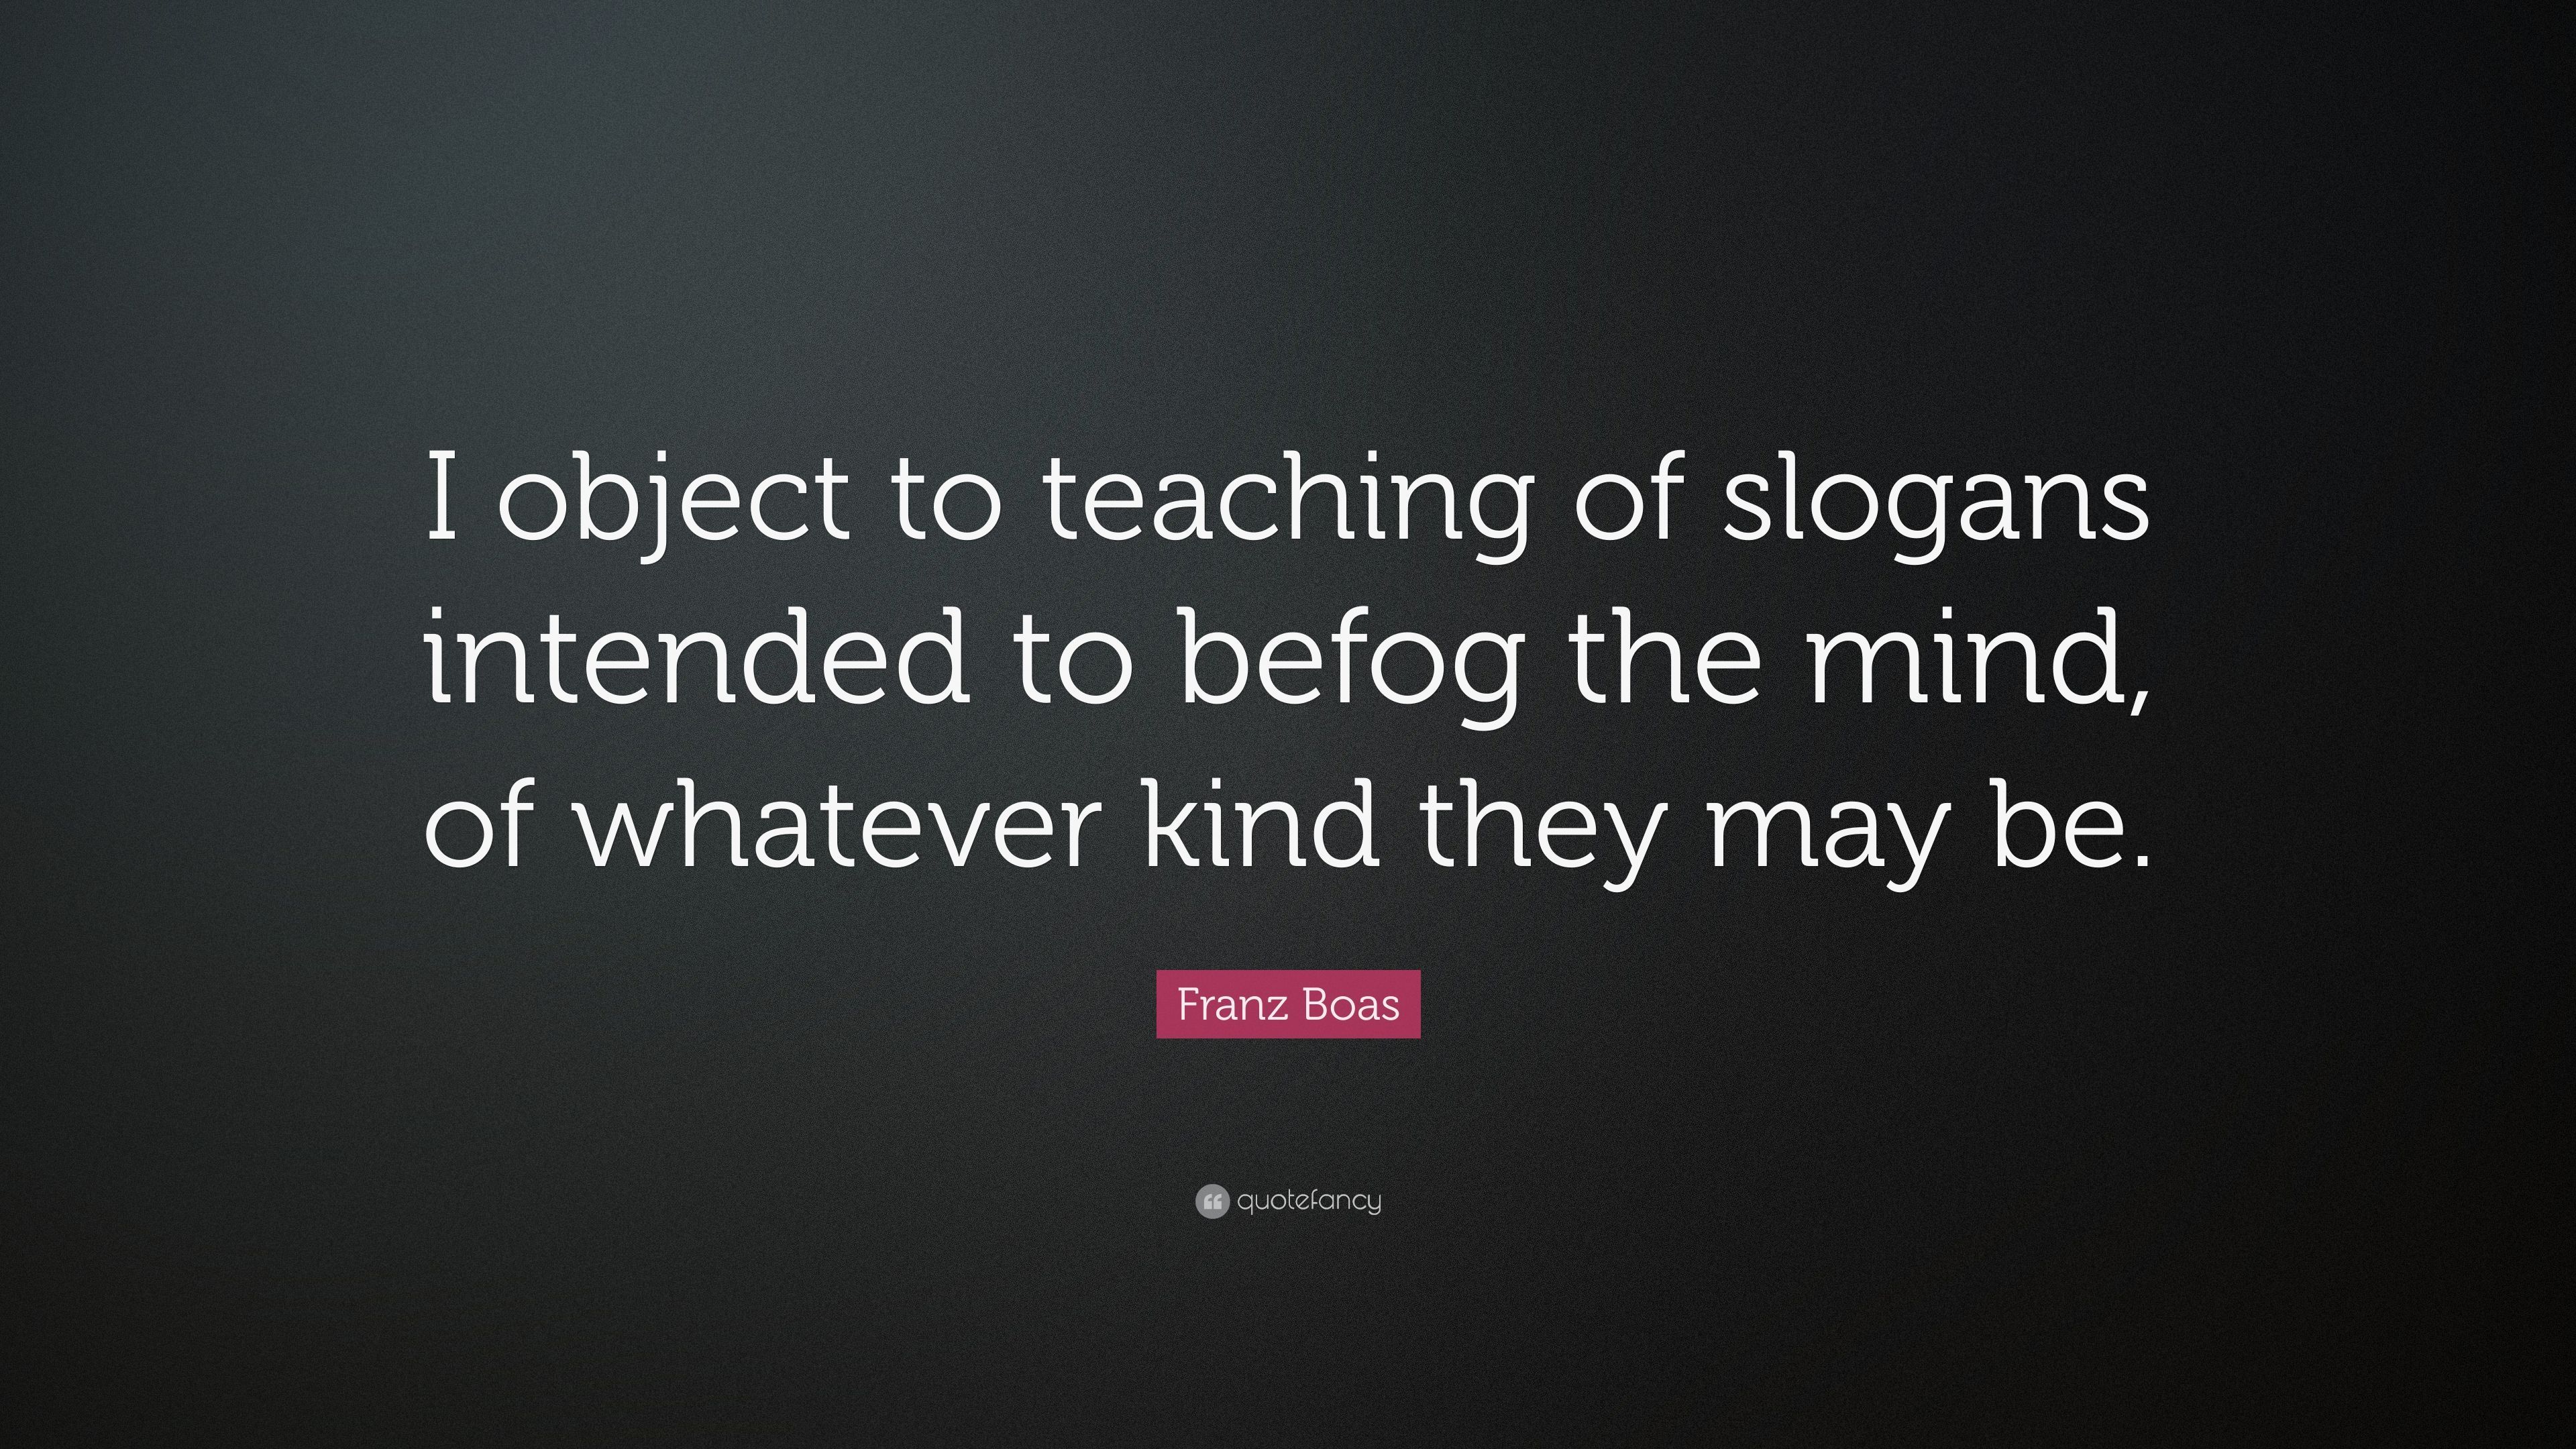 Franz Boas Quote: “I object to teaching of slogans intended to befog